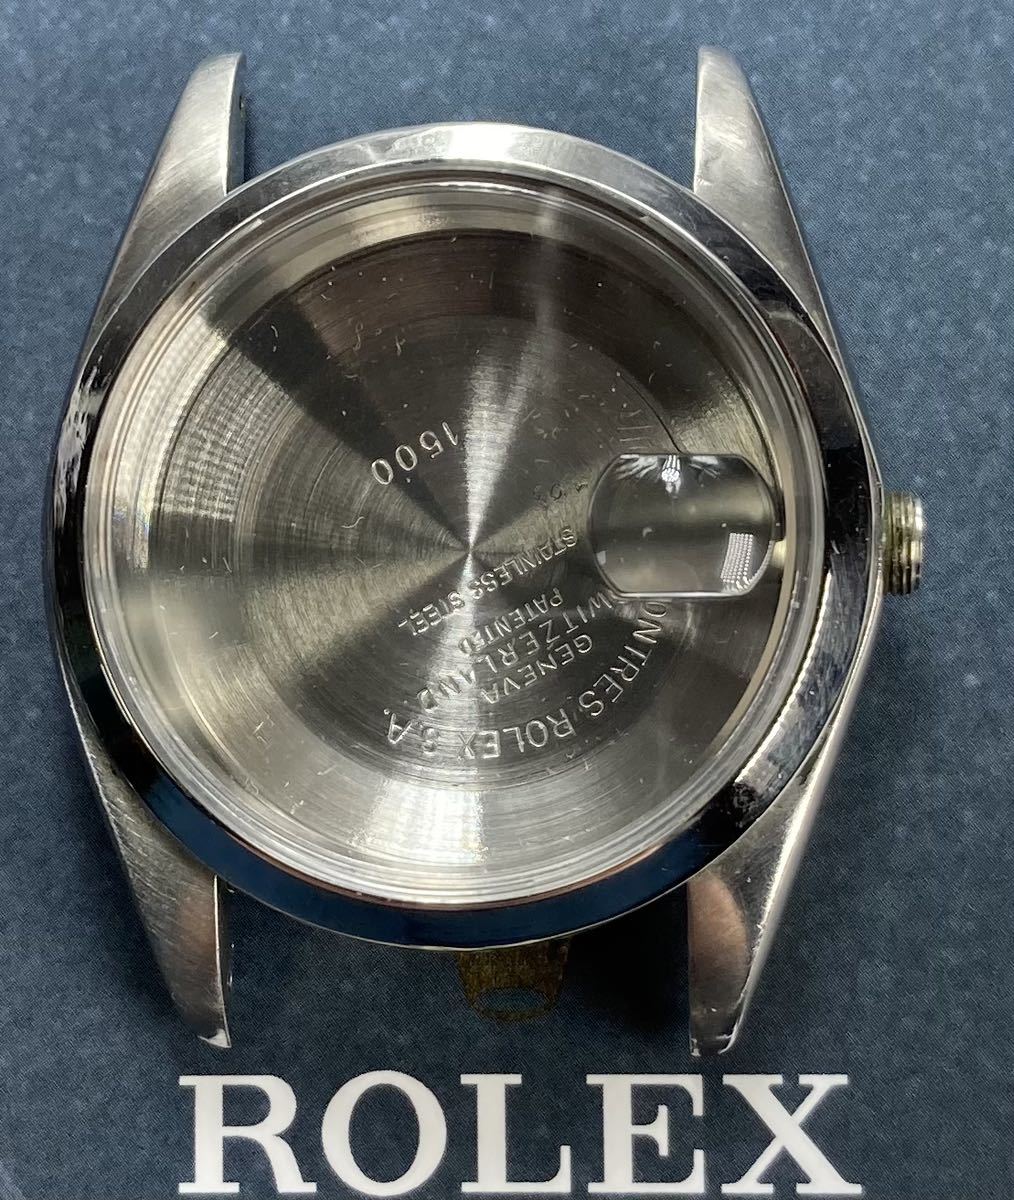 1500 OYSTER CASE ロレックス オイスターパーペチュアルデイト ミドルケース 1501 cal.1560 1570 ROLEX OYSTER PERPETUAL DATE 1979年